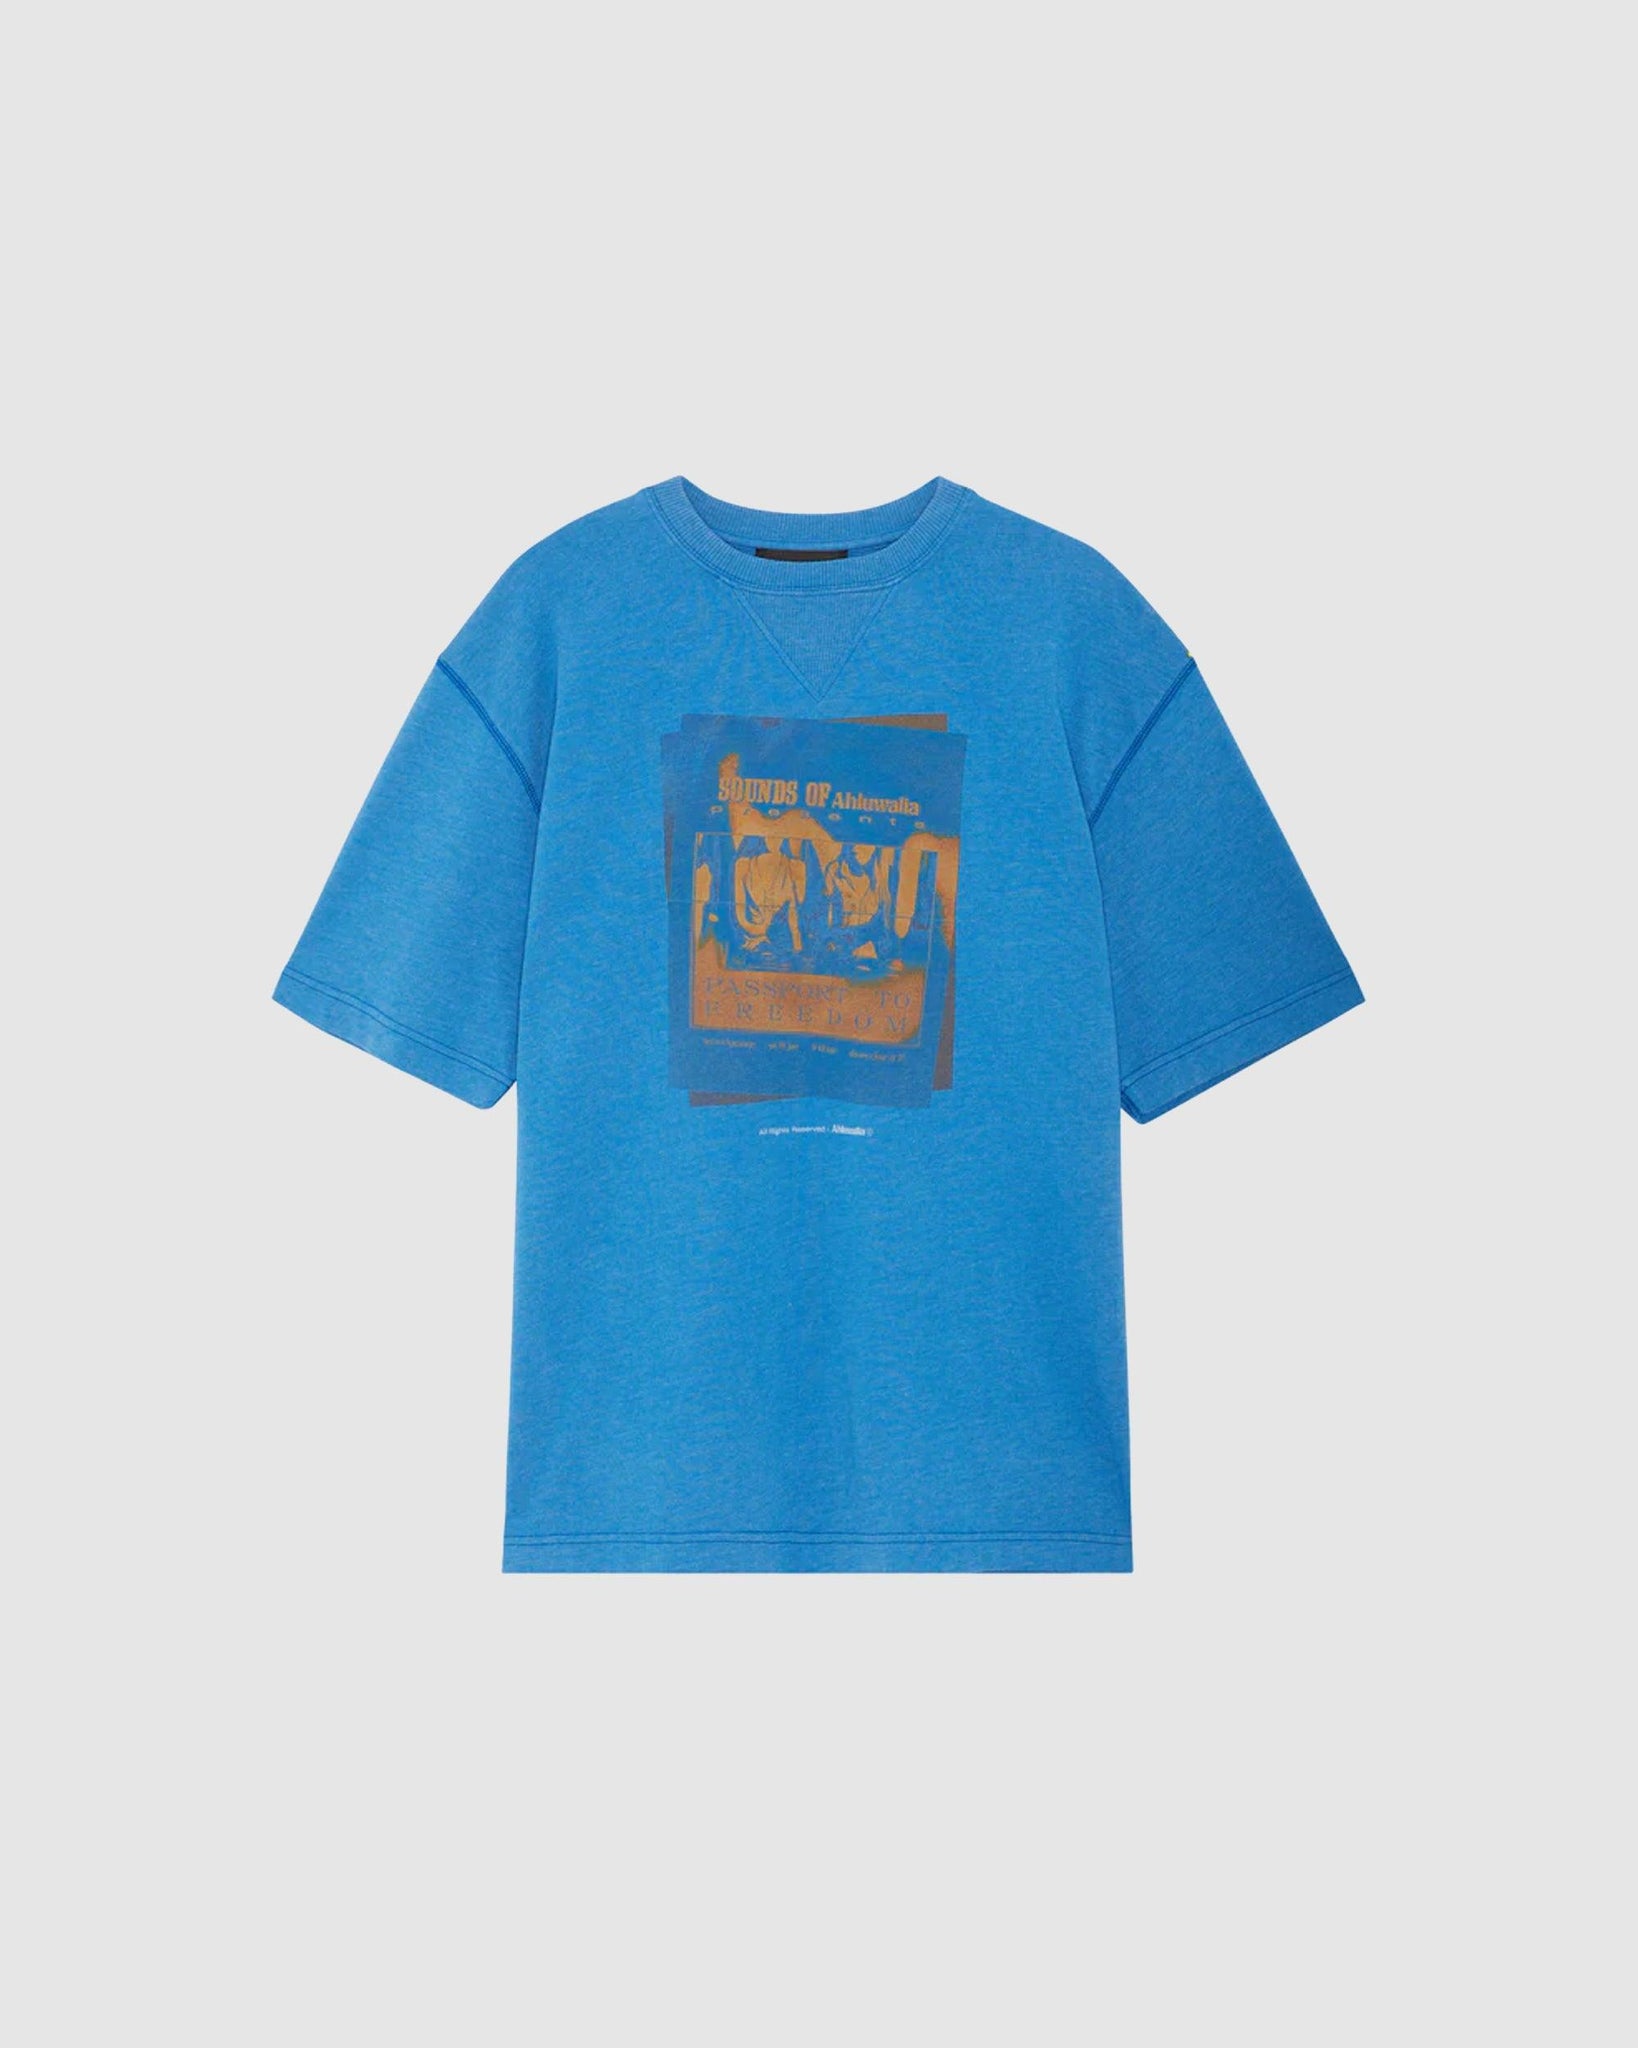 Passport To Freedom Tee - {{ collection.title }} - Chinatown Country Club 